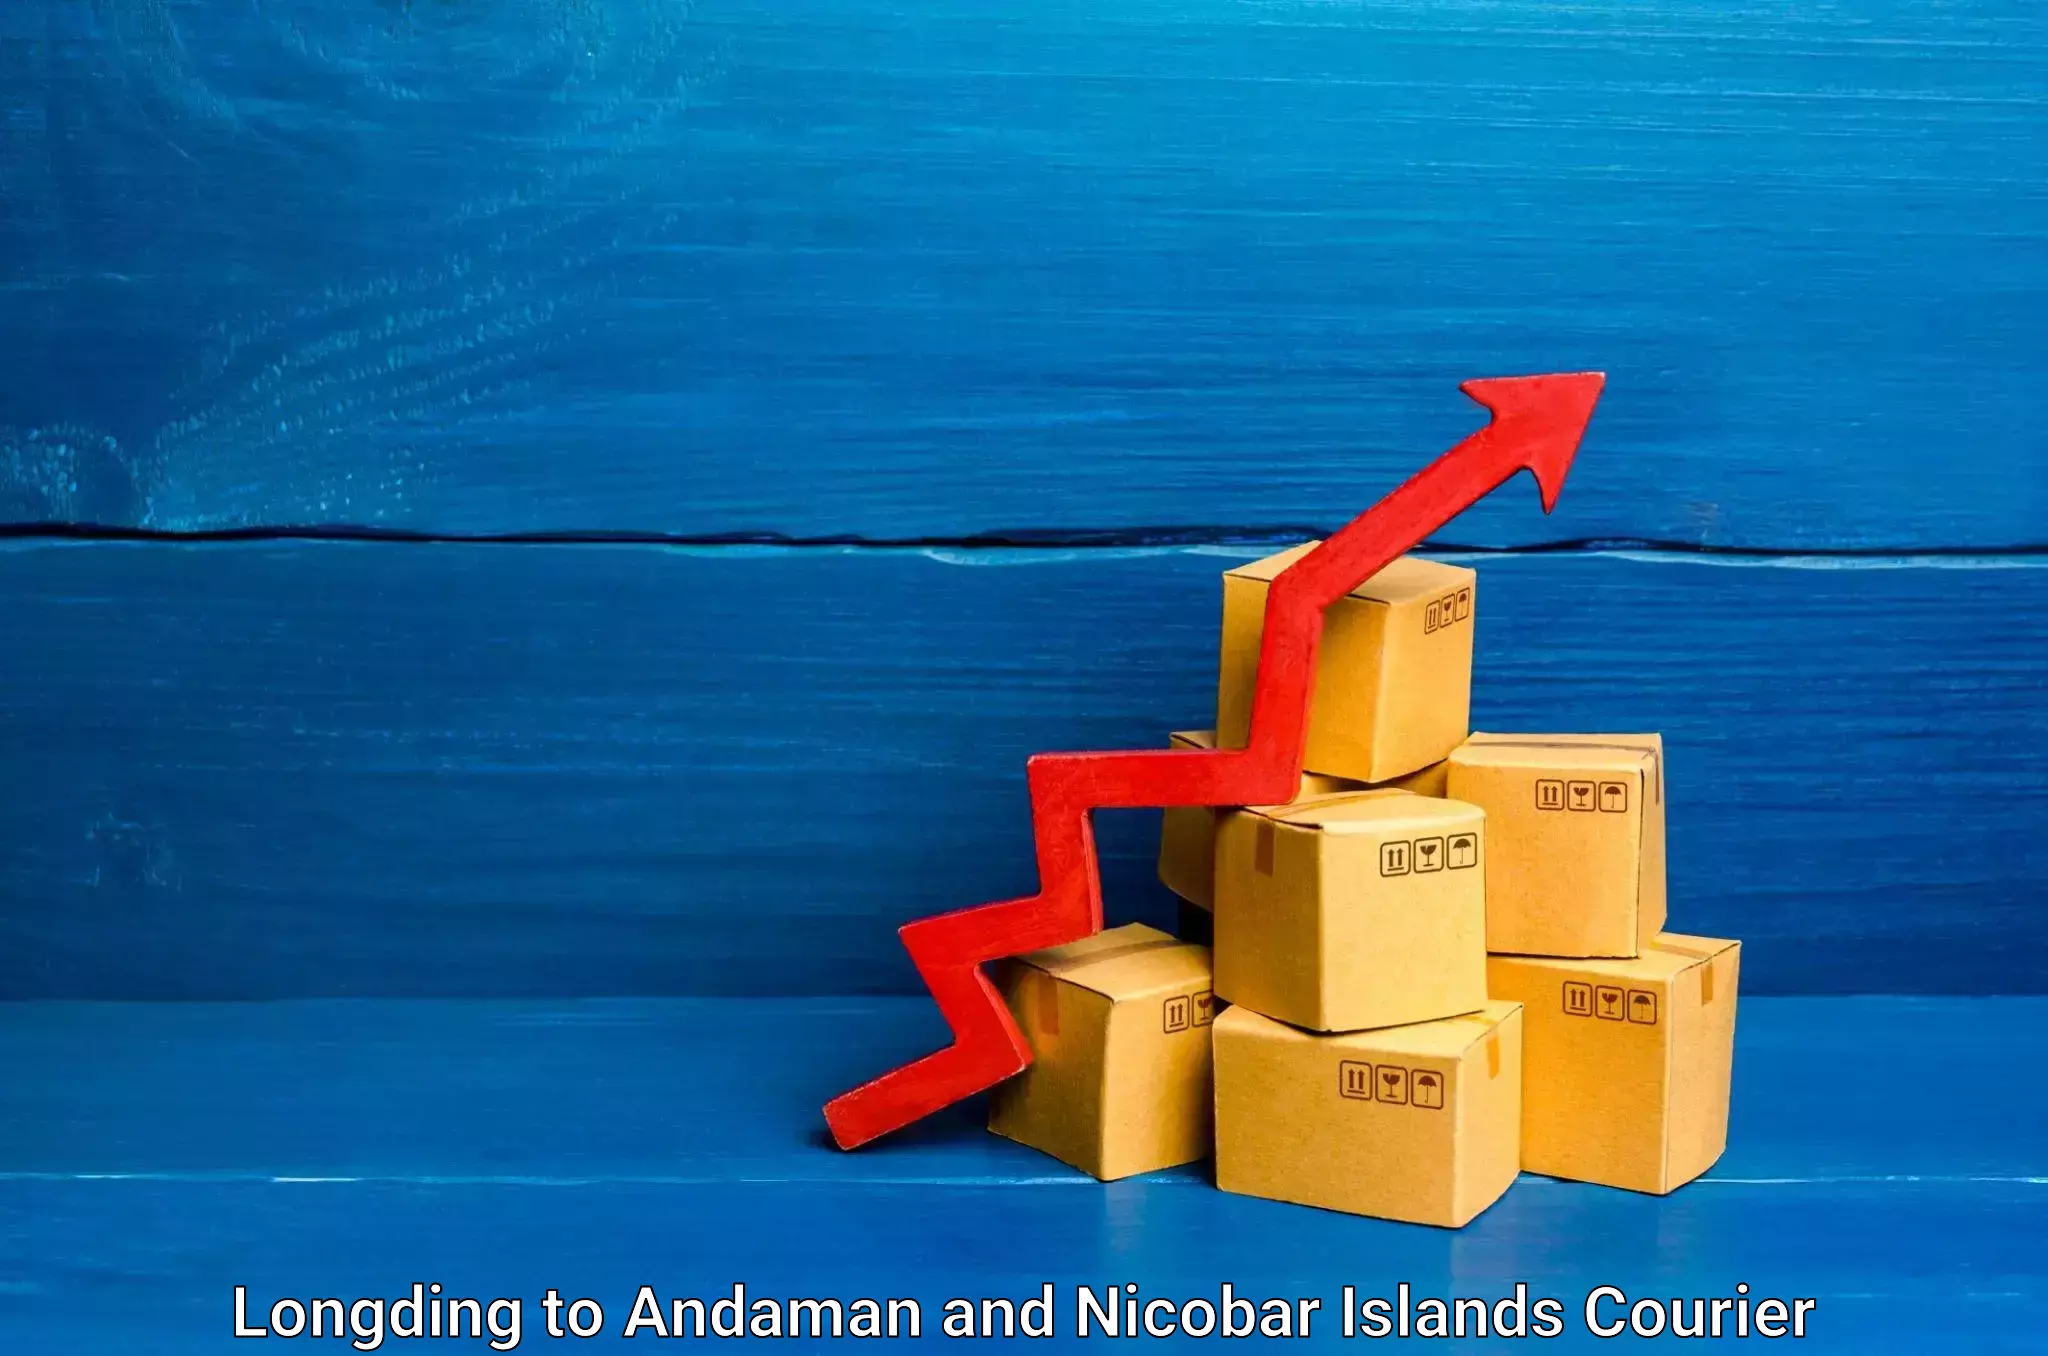 Express package services Longding to Andaman and Nicobar Islands